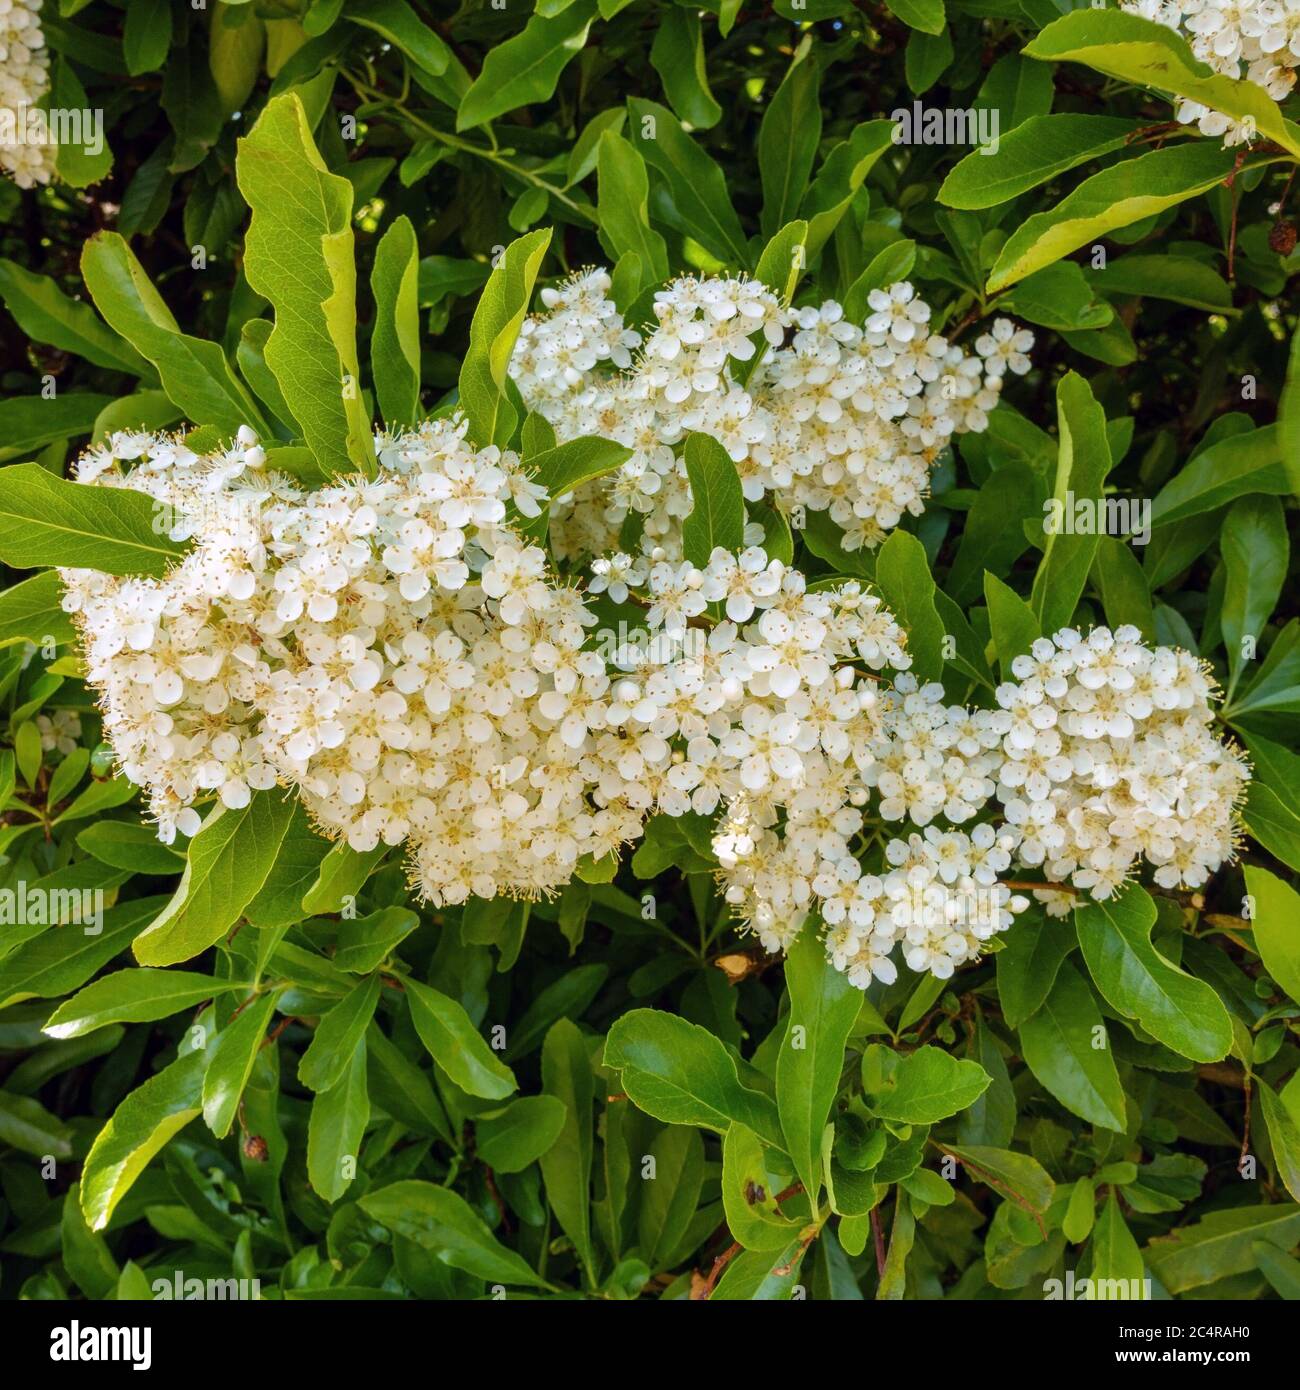 White spring blossom flowers and green leafy foliage of Pyracantha Firethorn in May, England, UK Stock Photo